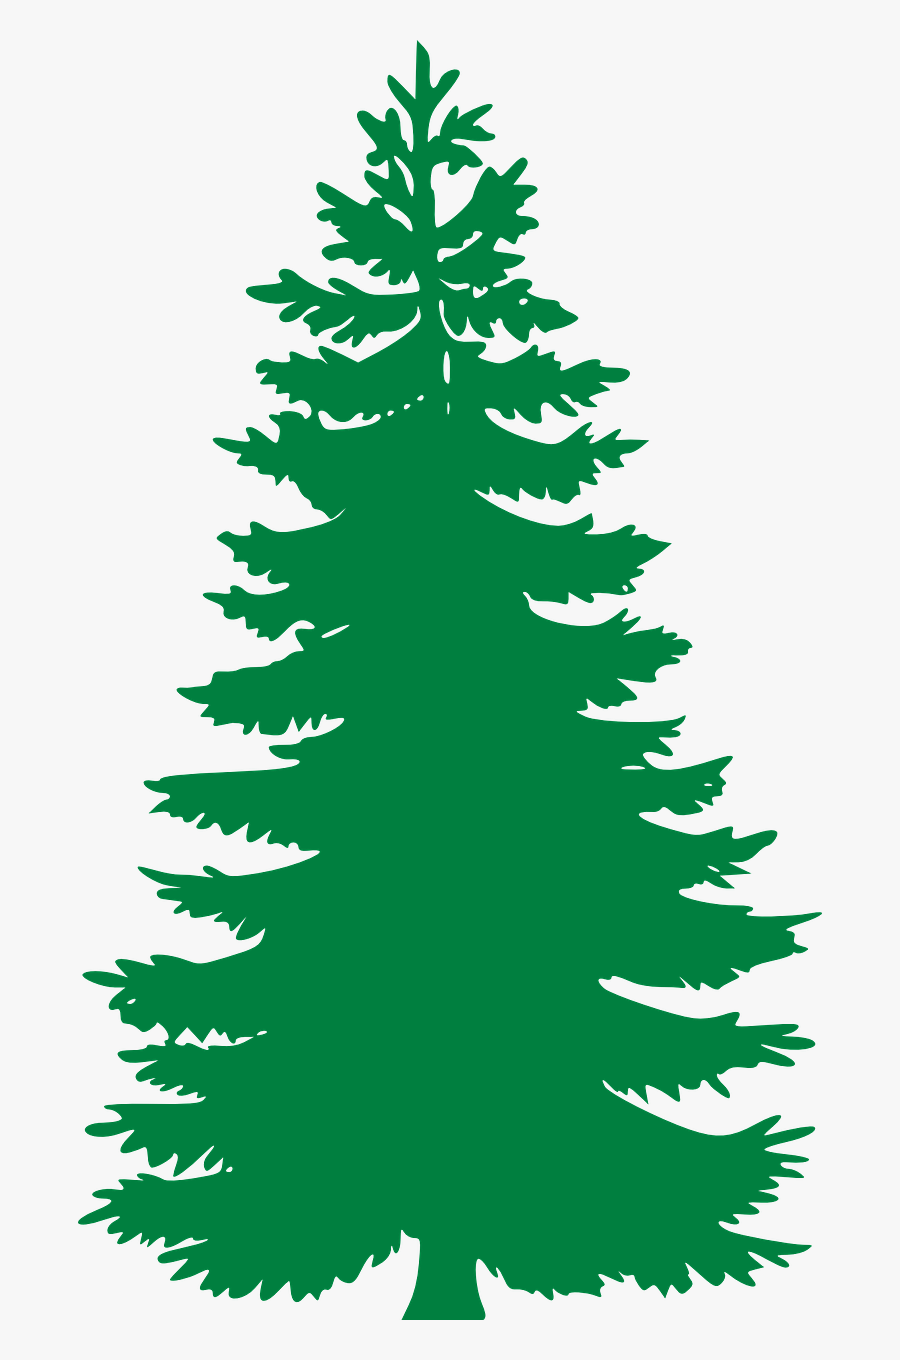 Free Image On Pixabay - Black And White Pine Tree, Transparent Clipart